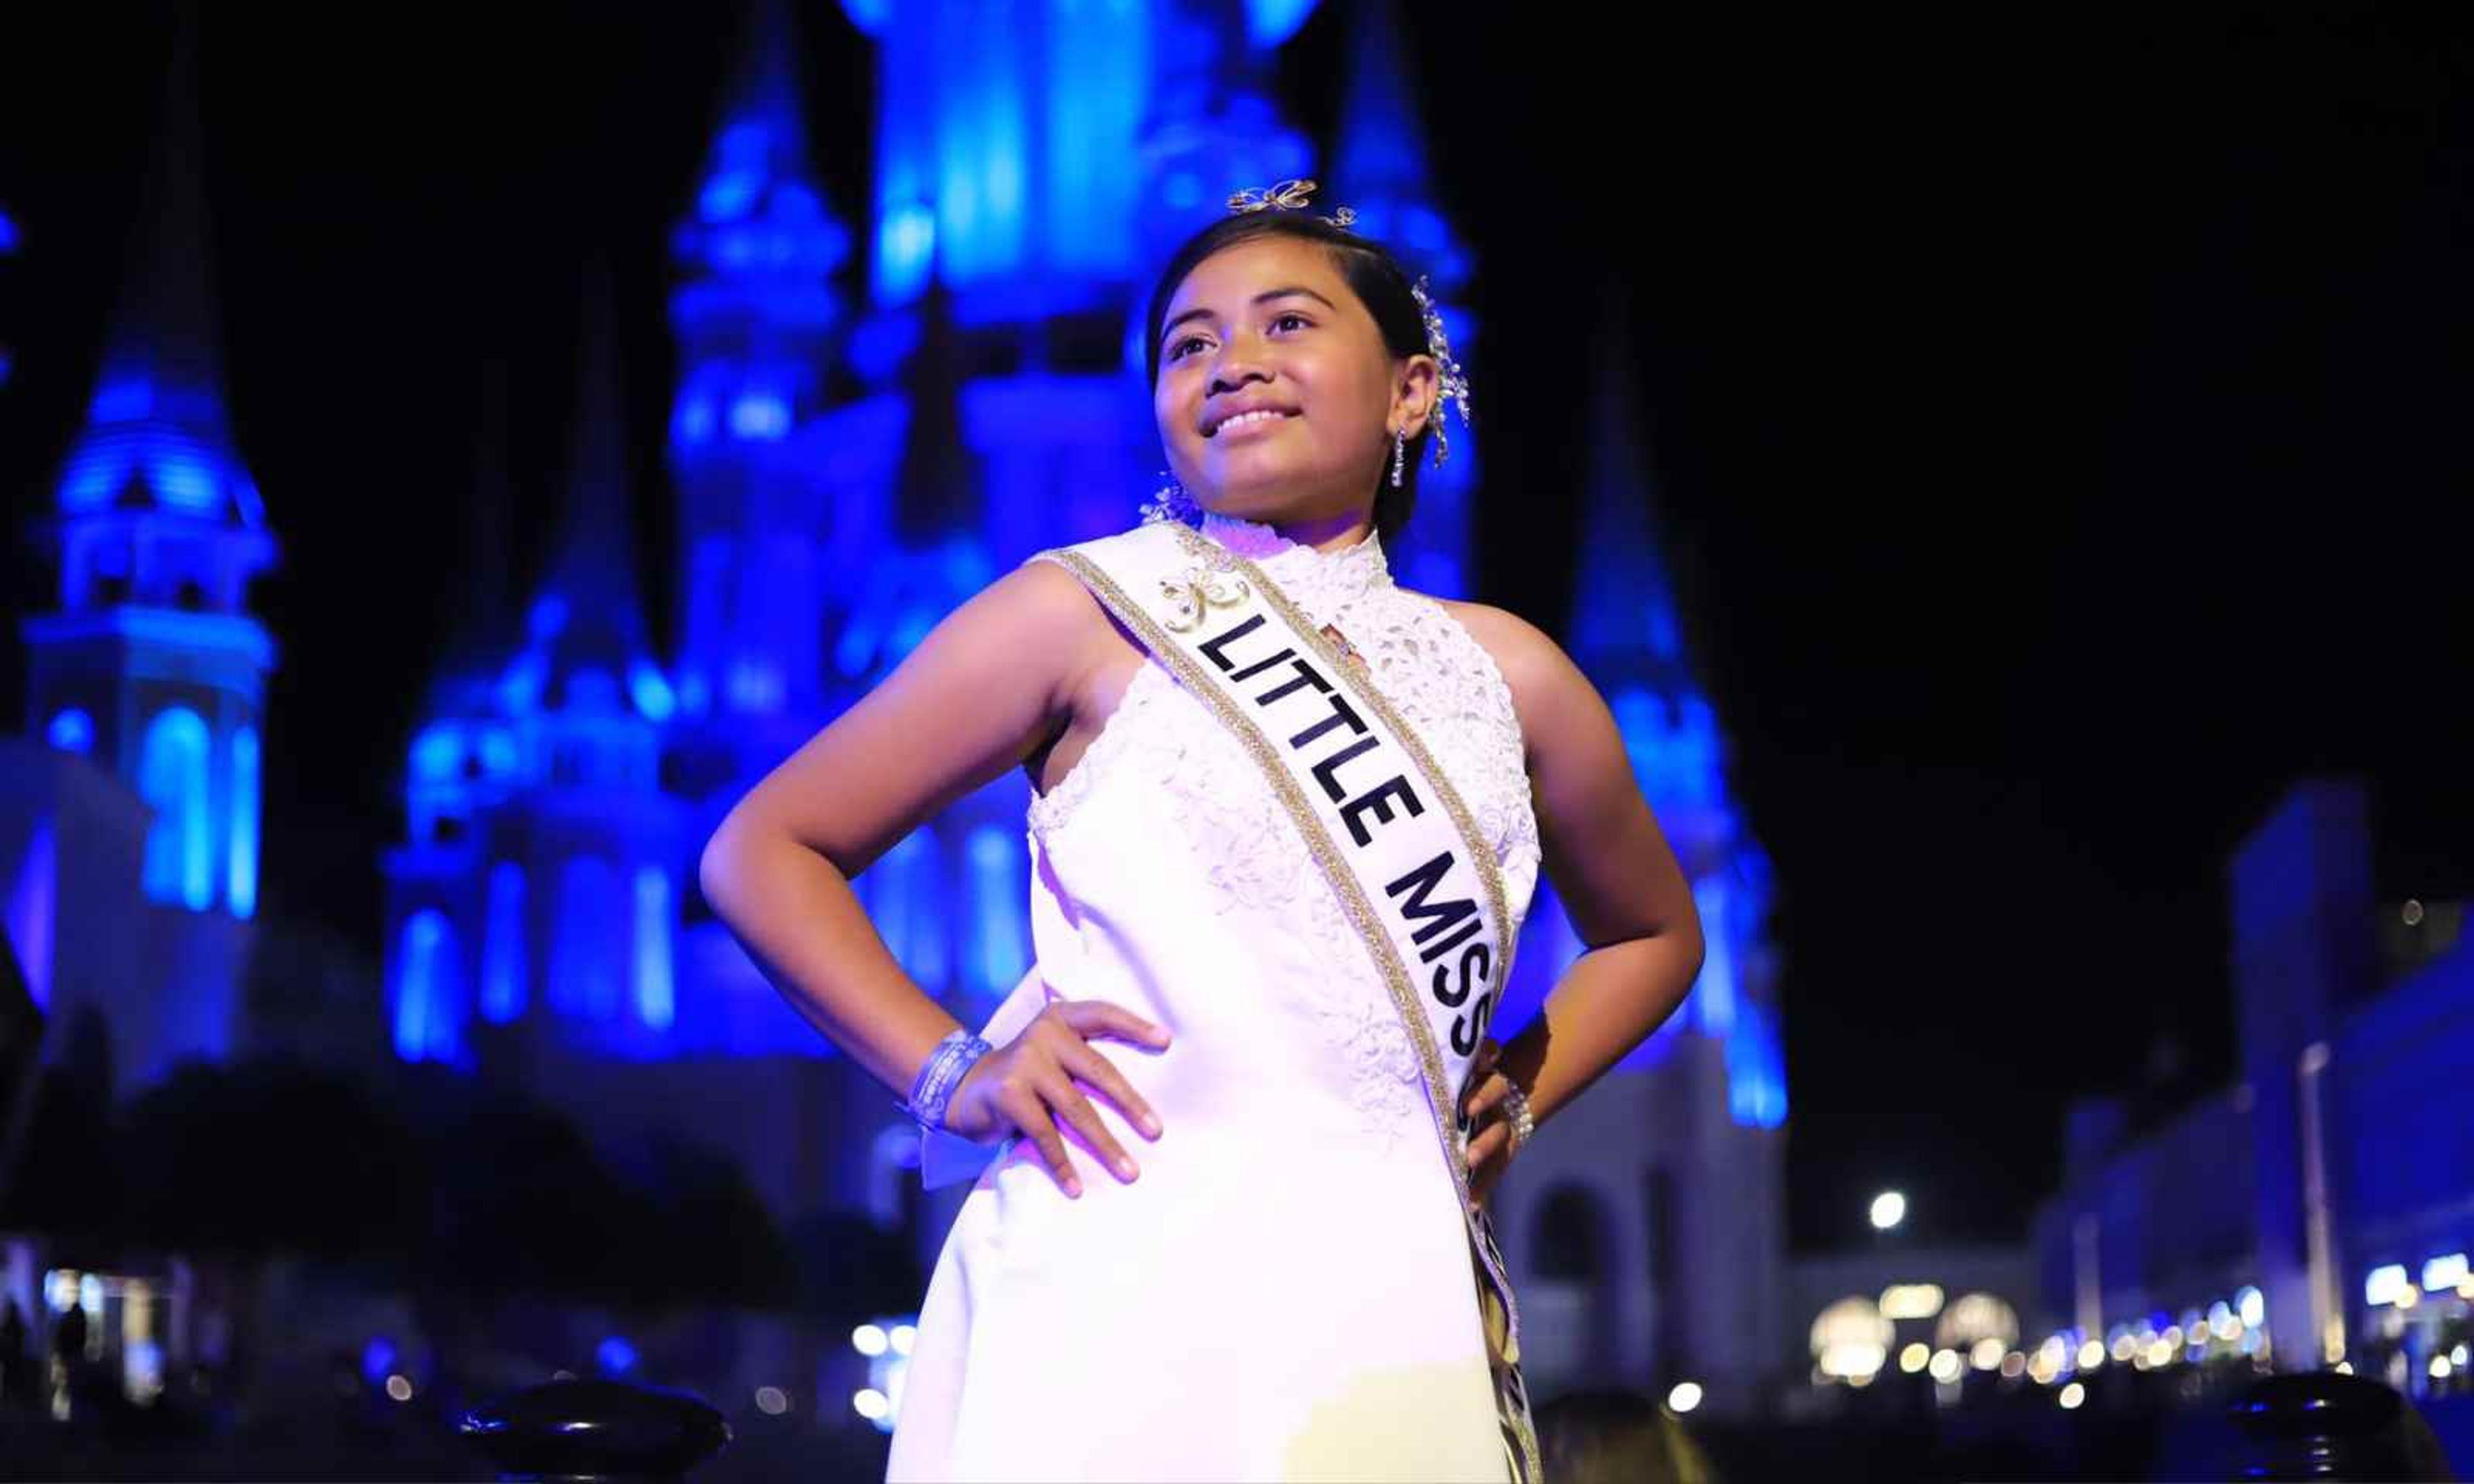 Young Tapaita Fonokalafi from Otaio, South Island wins Little Miss Universe pageant held in Turkey.